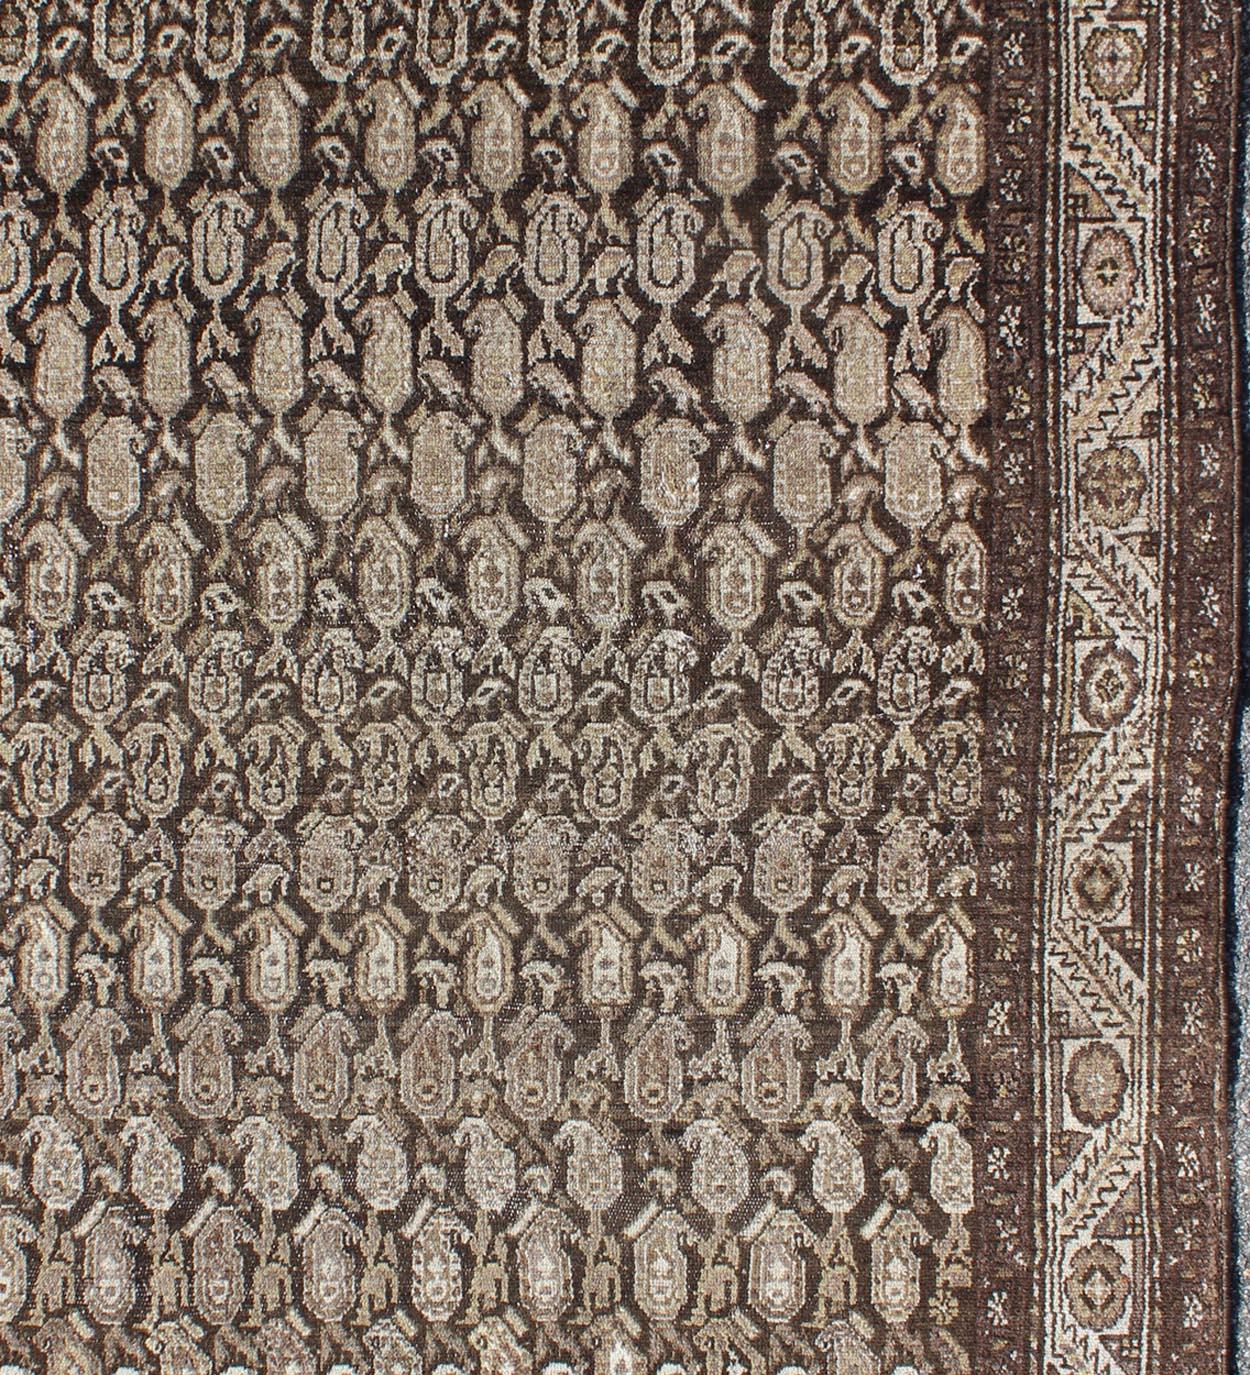 Antique Persian Seraband rug with all-over tribal design in shades of brown, rug 17-0703, country of origin / type: Iran / Seraband, circa 1910

This antique Persian Seraband rug features an all-over tribal pattern set on a variegated brown